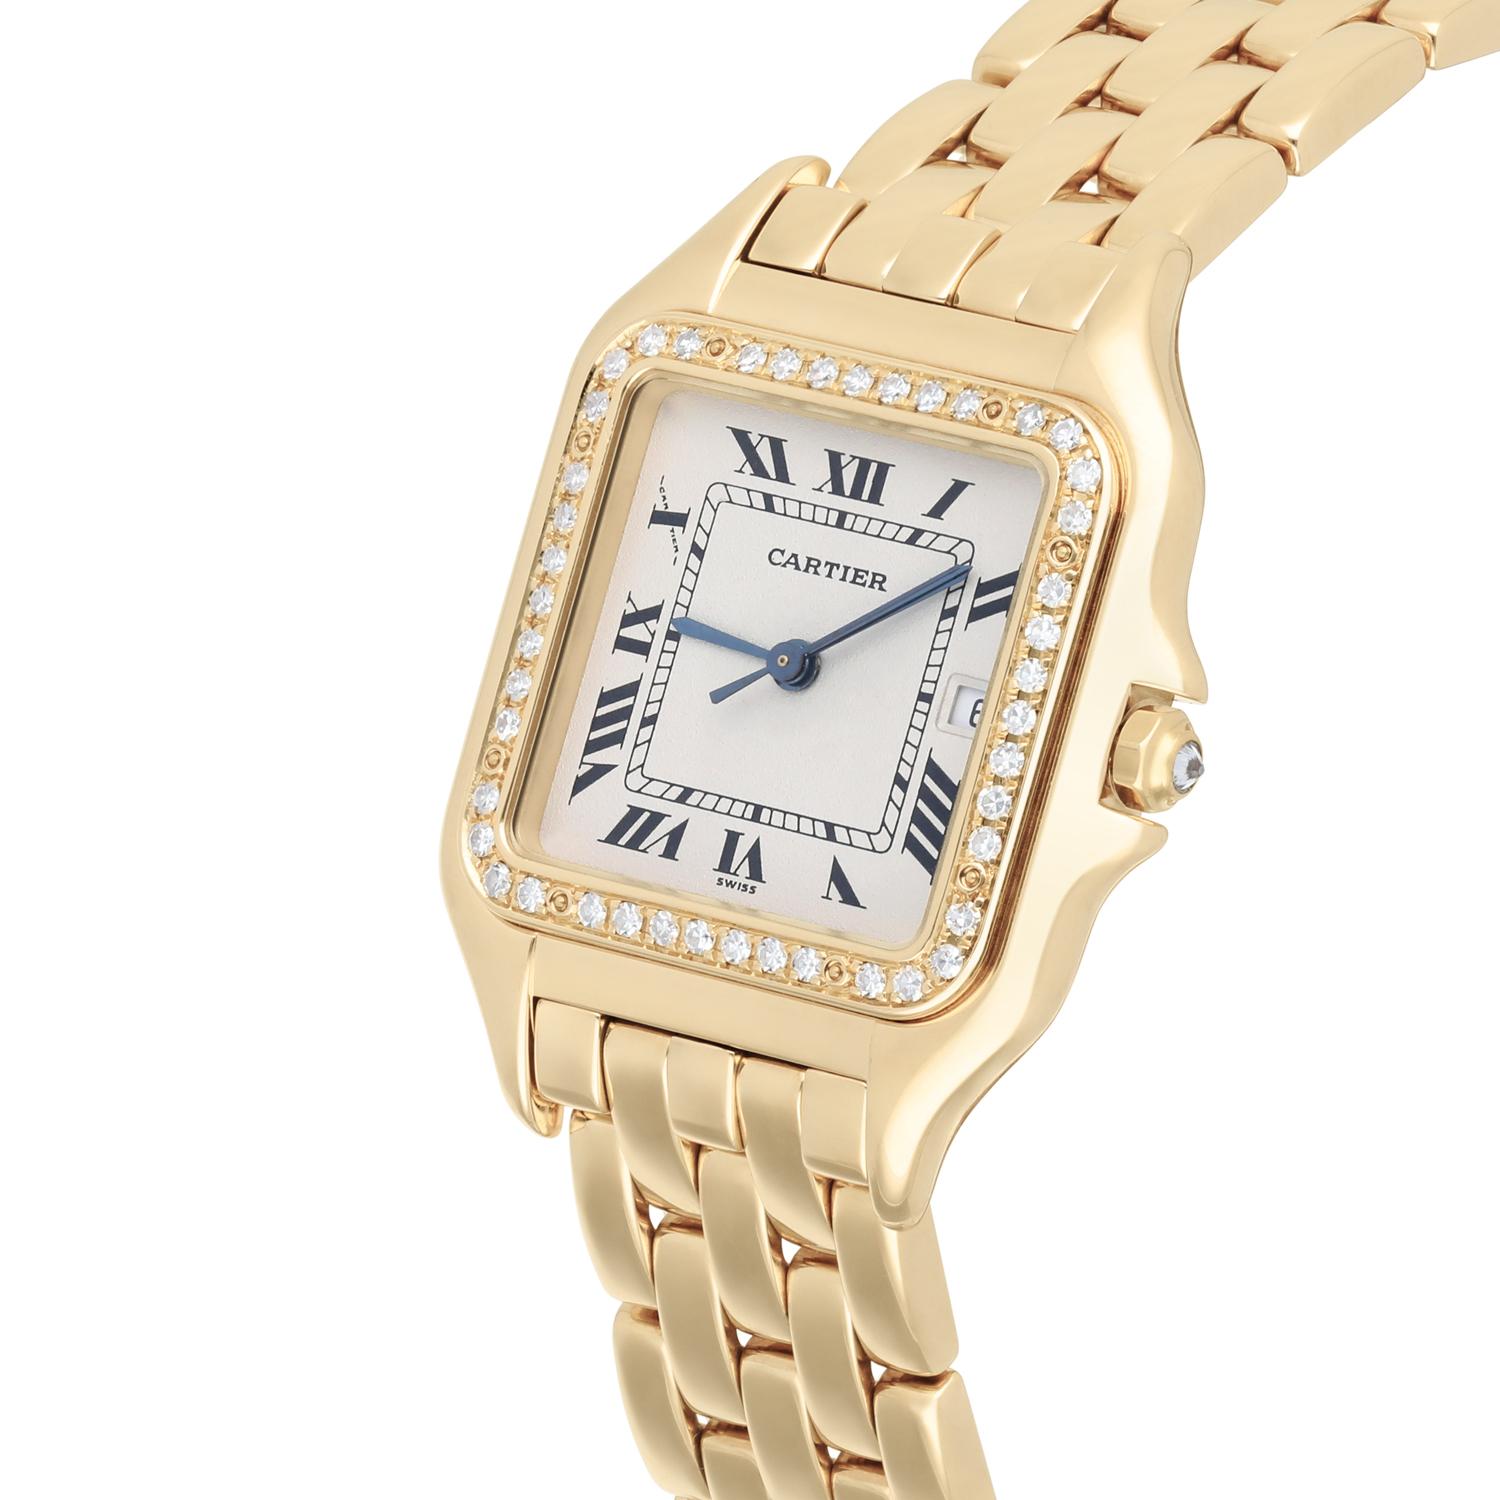 Modern Cartier Panthere 29mm Ladies Large 18K Yellow Gold Watch with Diamonds 887968 For Sale